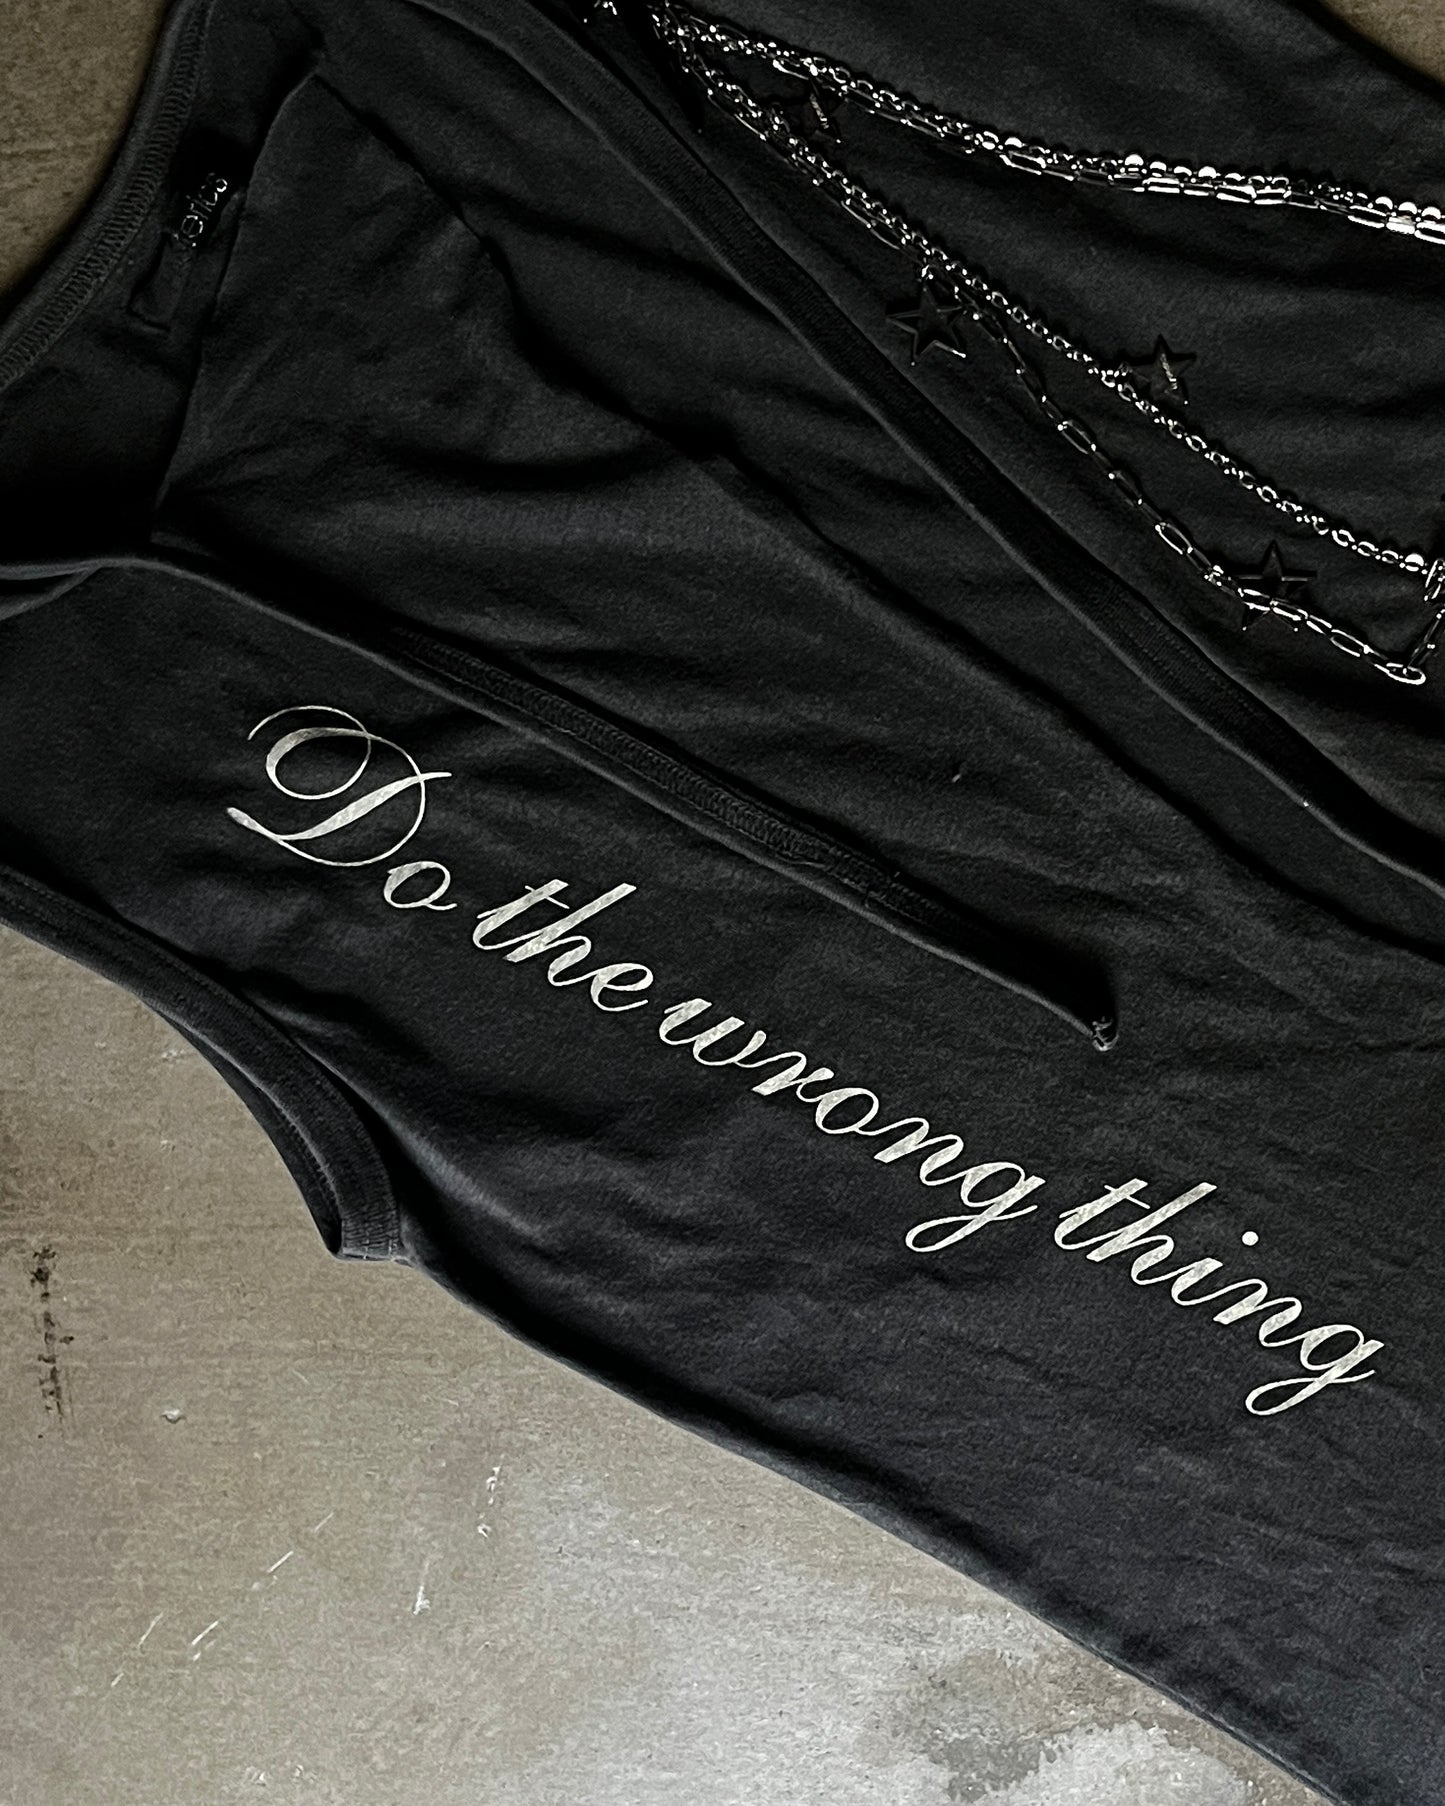 Hysteric Glamour "Do The Wrong Thing" Star Chain Tank